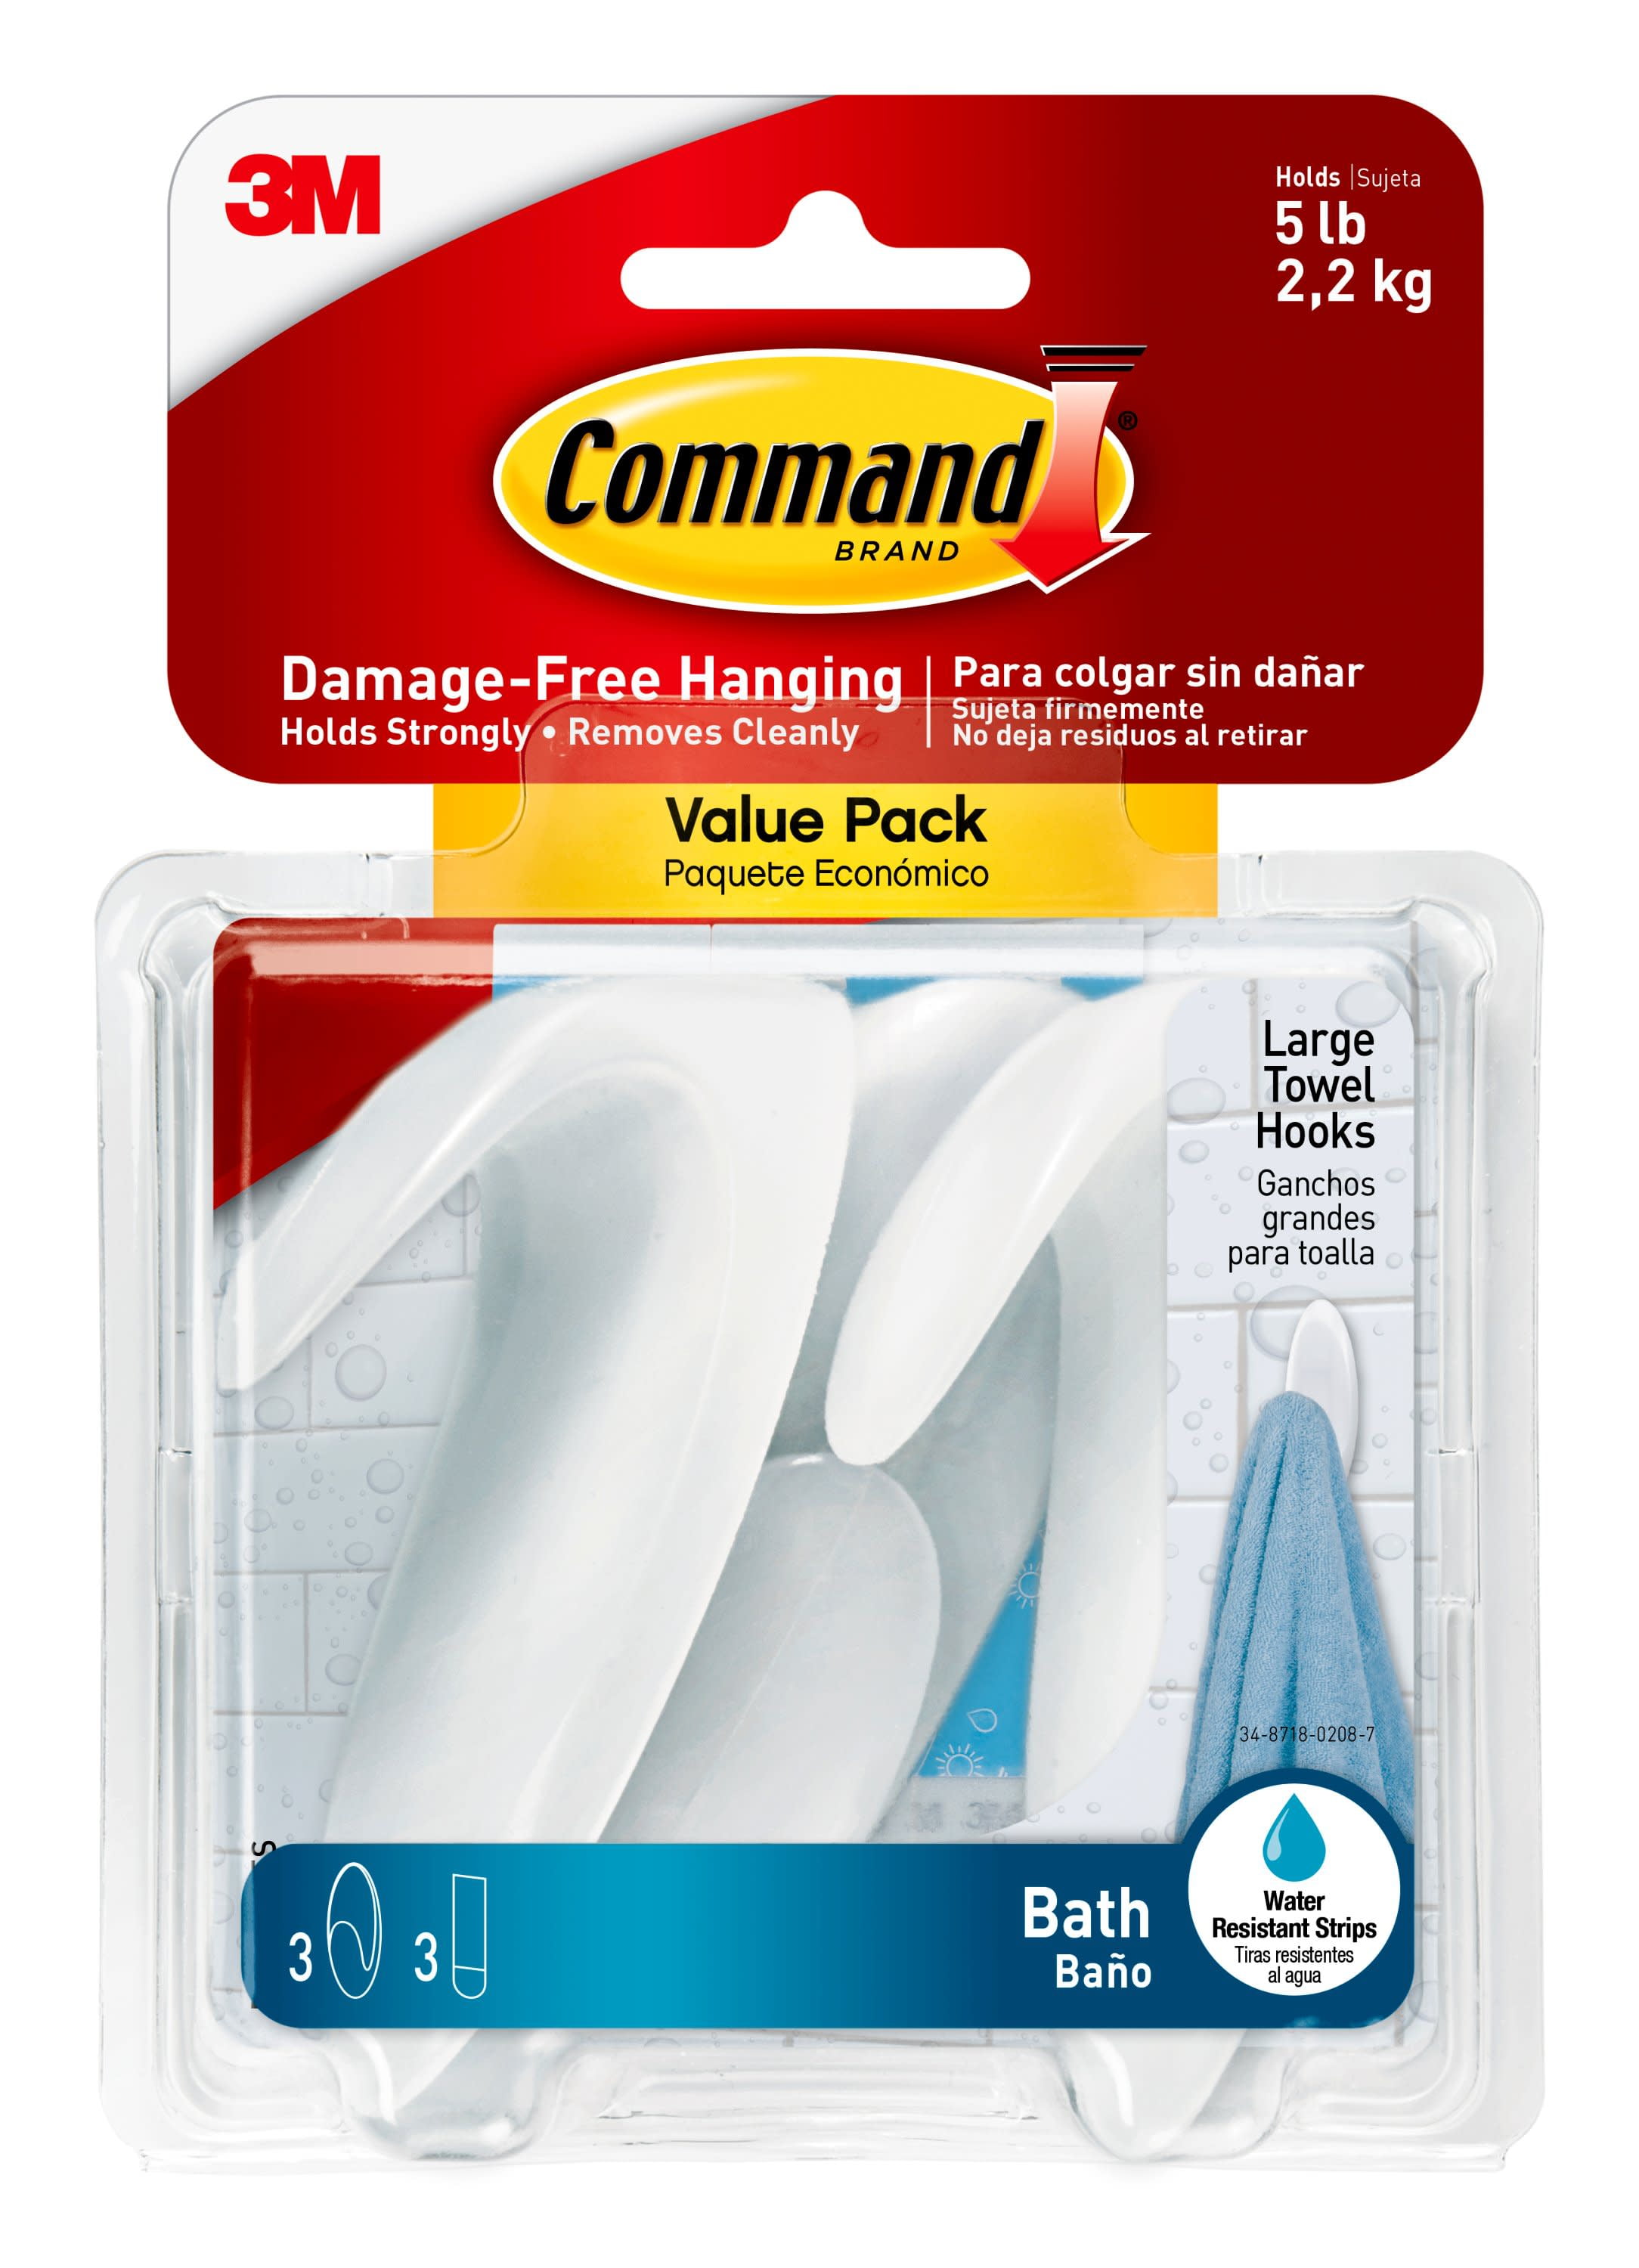 Command Large Towel Hooks Value Pack, Frosted, 3 Wall Hooks, Bathroom Organization